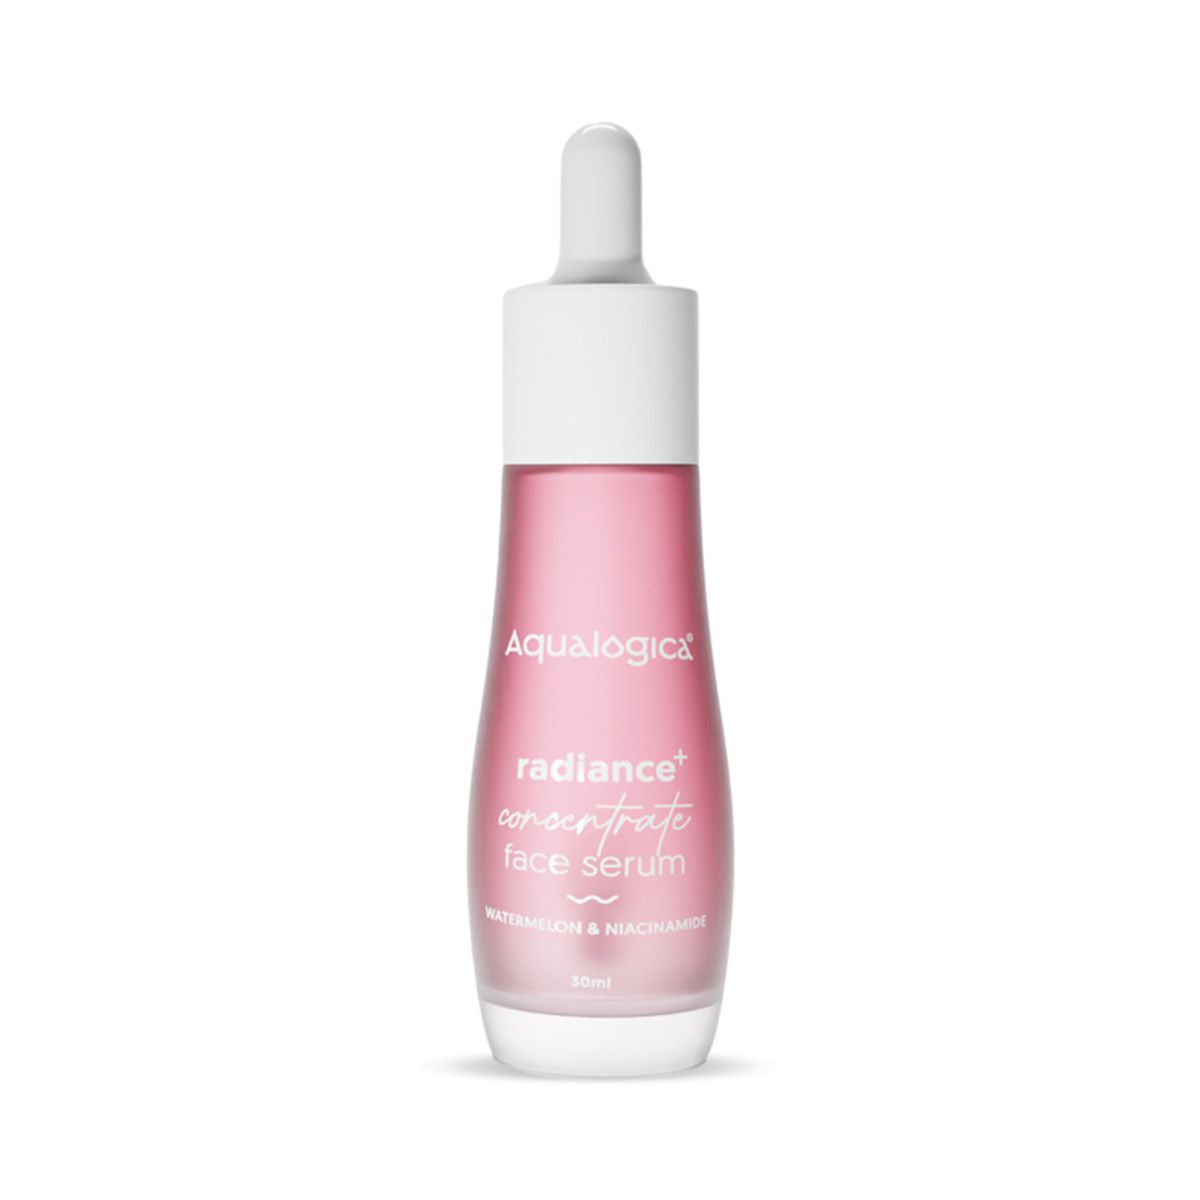 FREEBIE - Radiance+ Concentrate Face Serum 30 ml